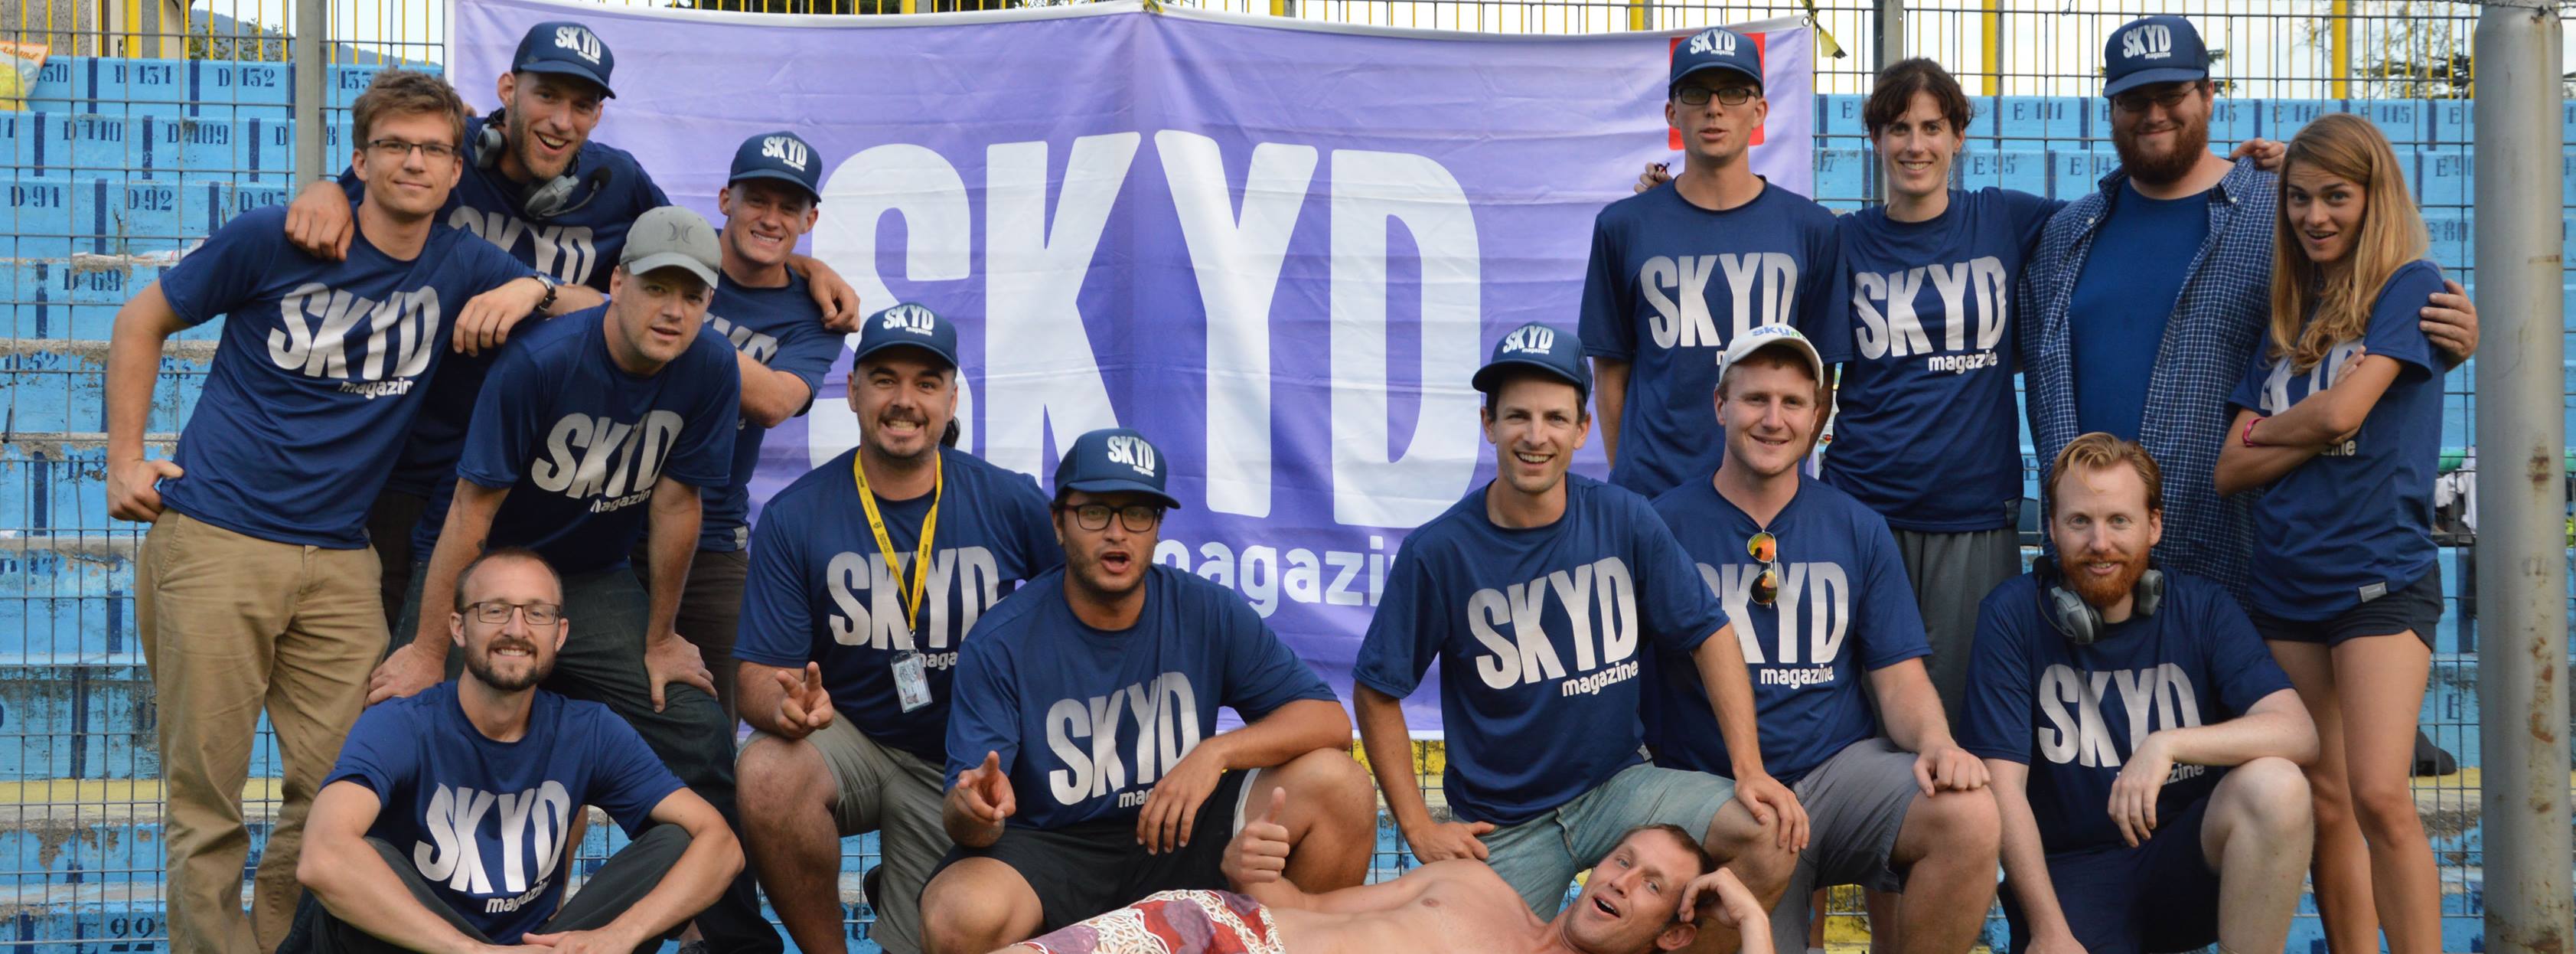 The hard-working Skyd team in Lecco, Italy!